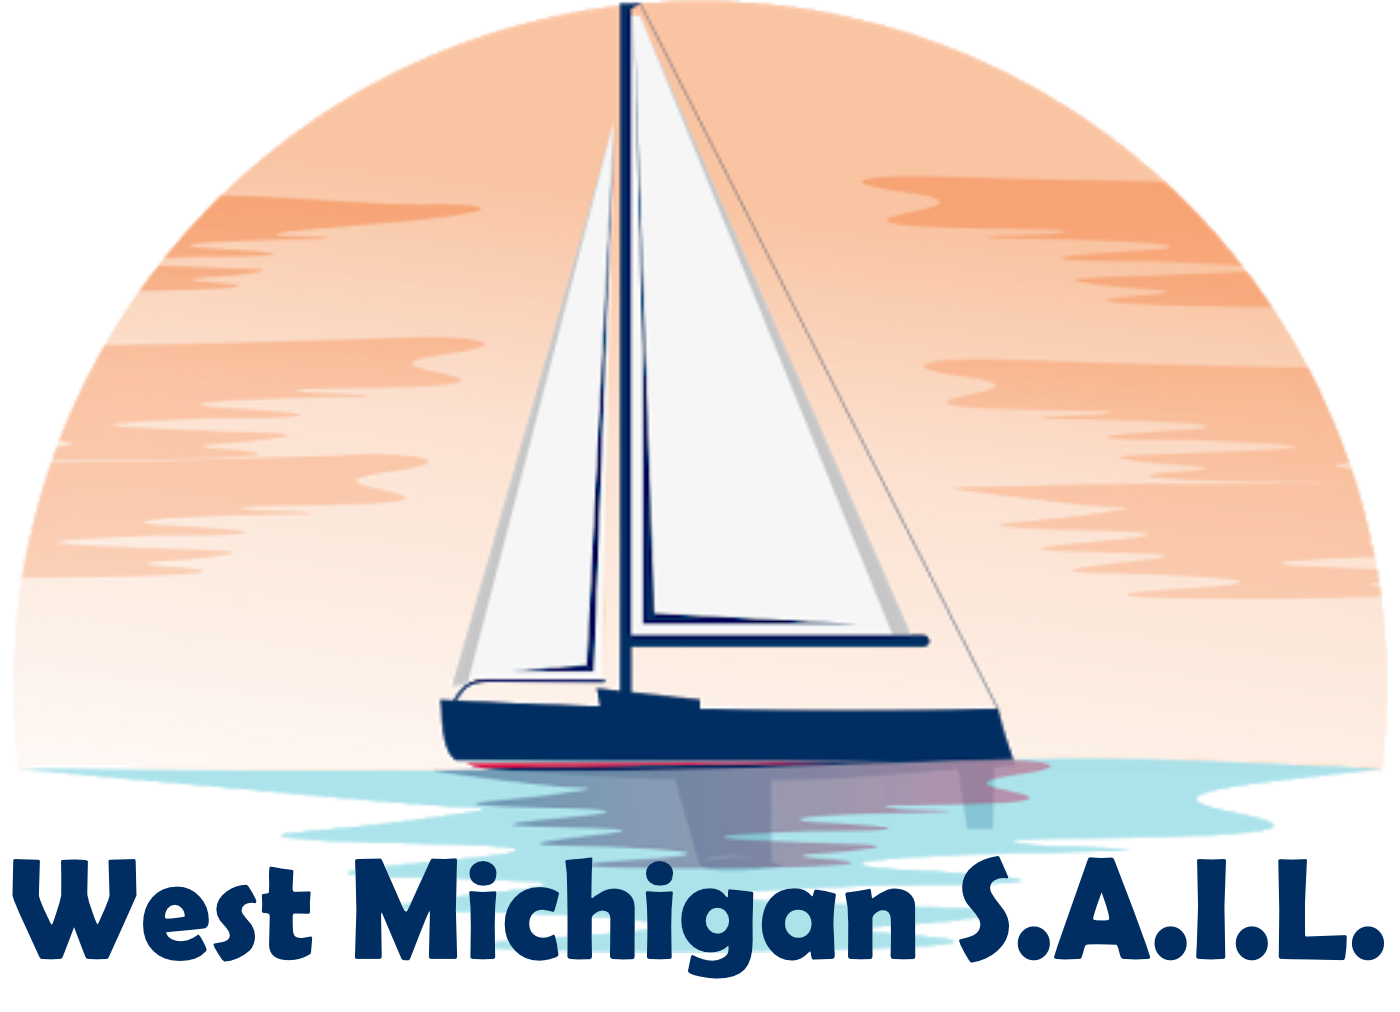 West Michigan SAIL - Helping Vets Help Themselves